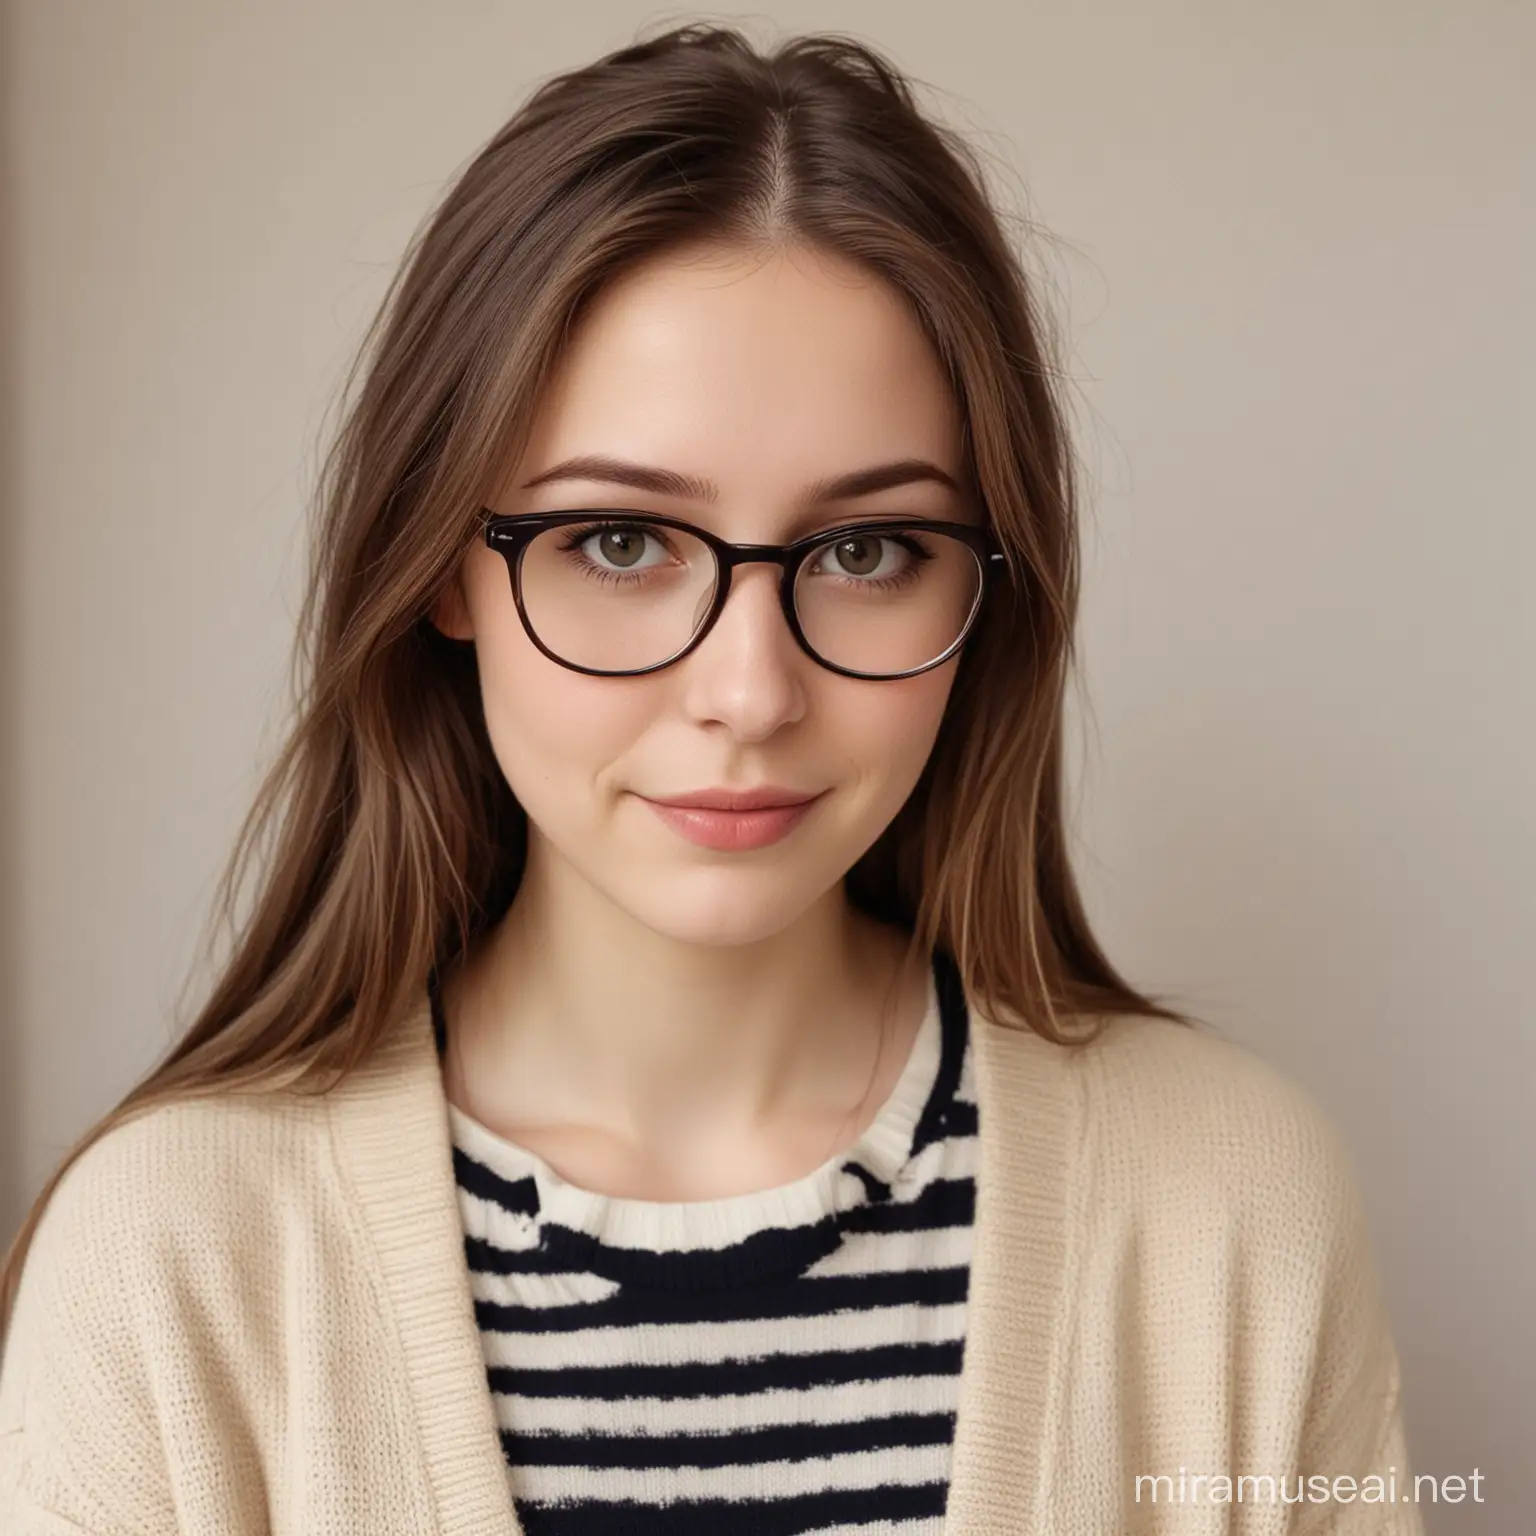 Nordic Petite Pale Girl in Glasses with Long Brown Hair and Cardigan